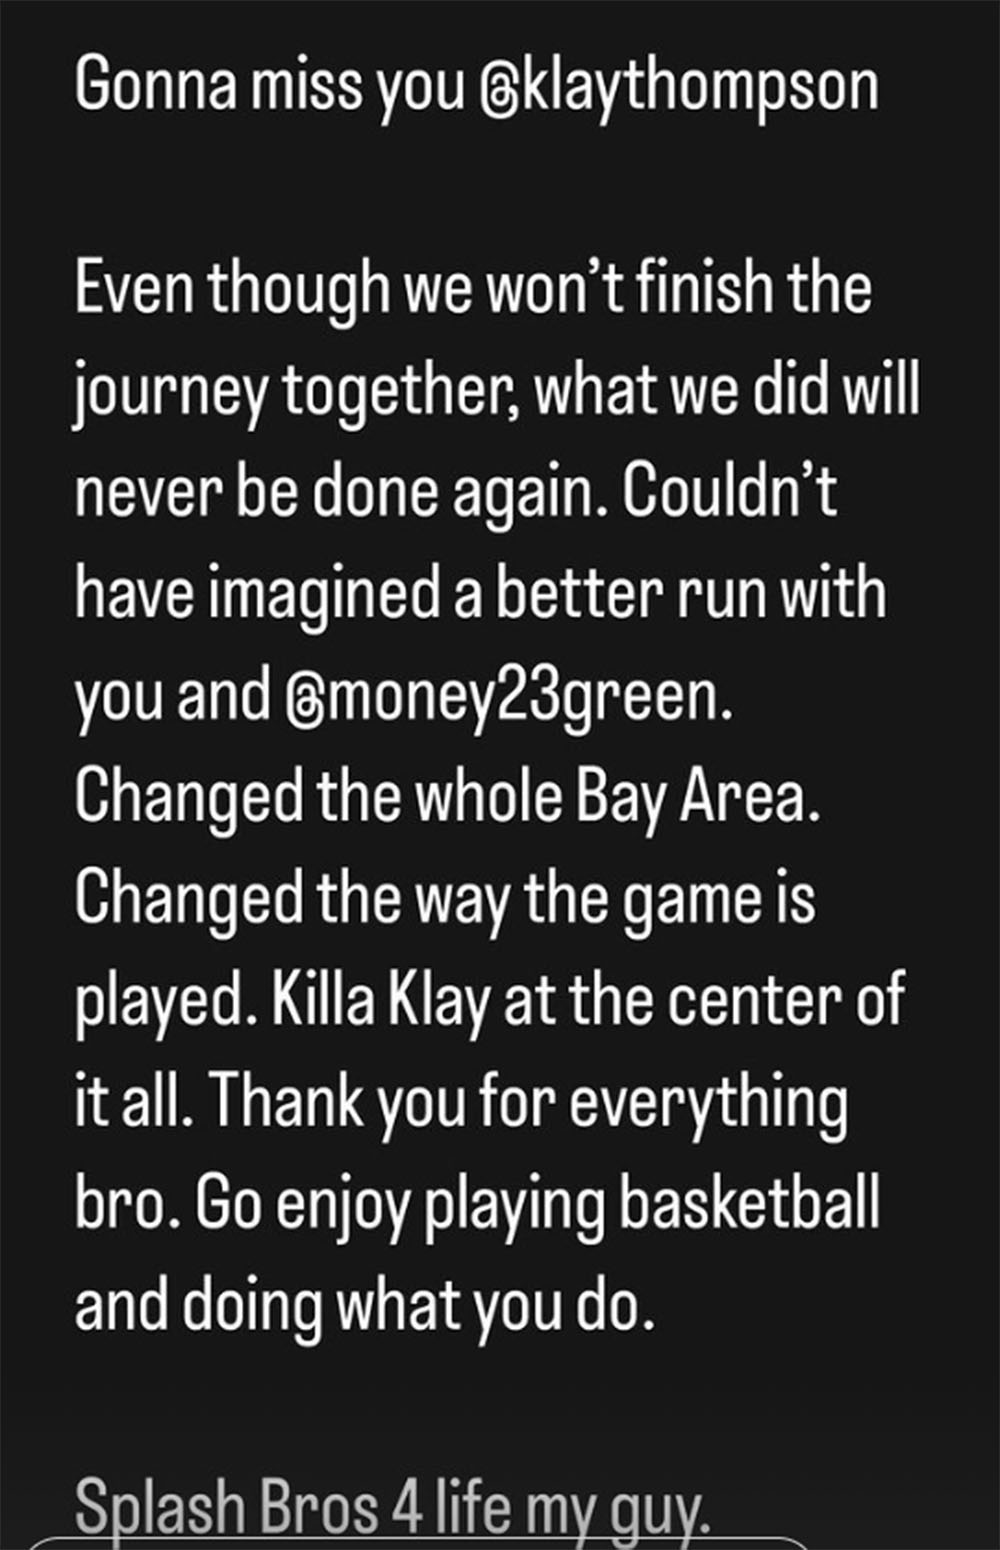 Steph Curry shares a message to Klay Thompson after his new deal with the Mavericks.